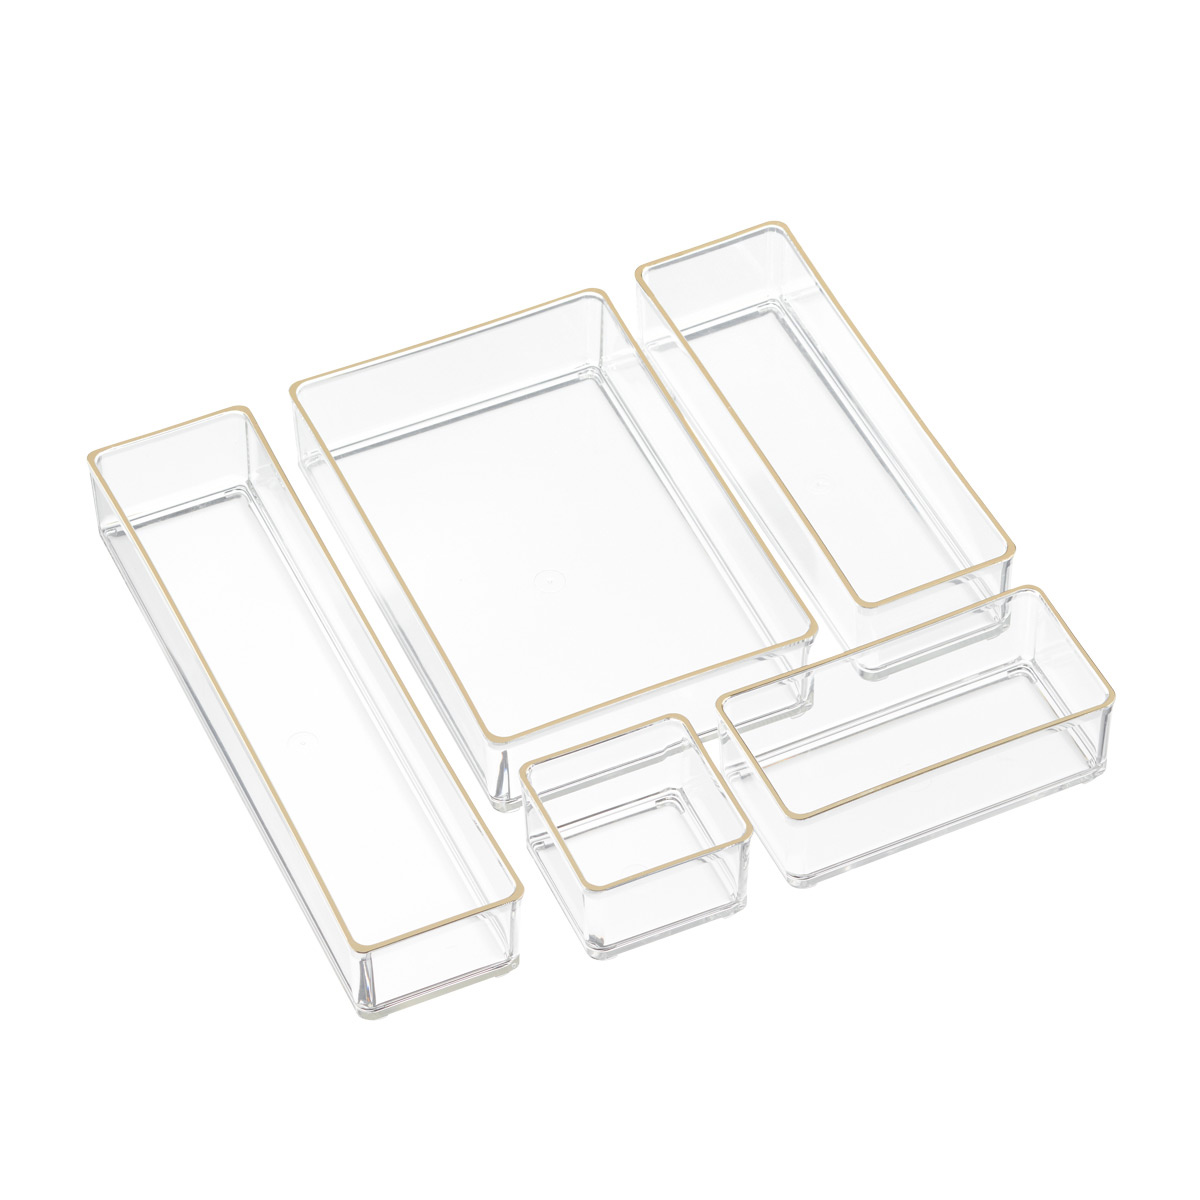 https://www.containerstore.com/catalogimages/468662/10090093-acrylic-stacking-drawer-org.jpg